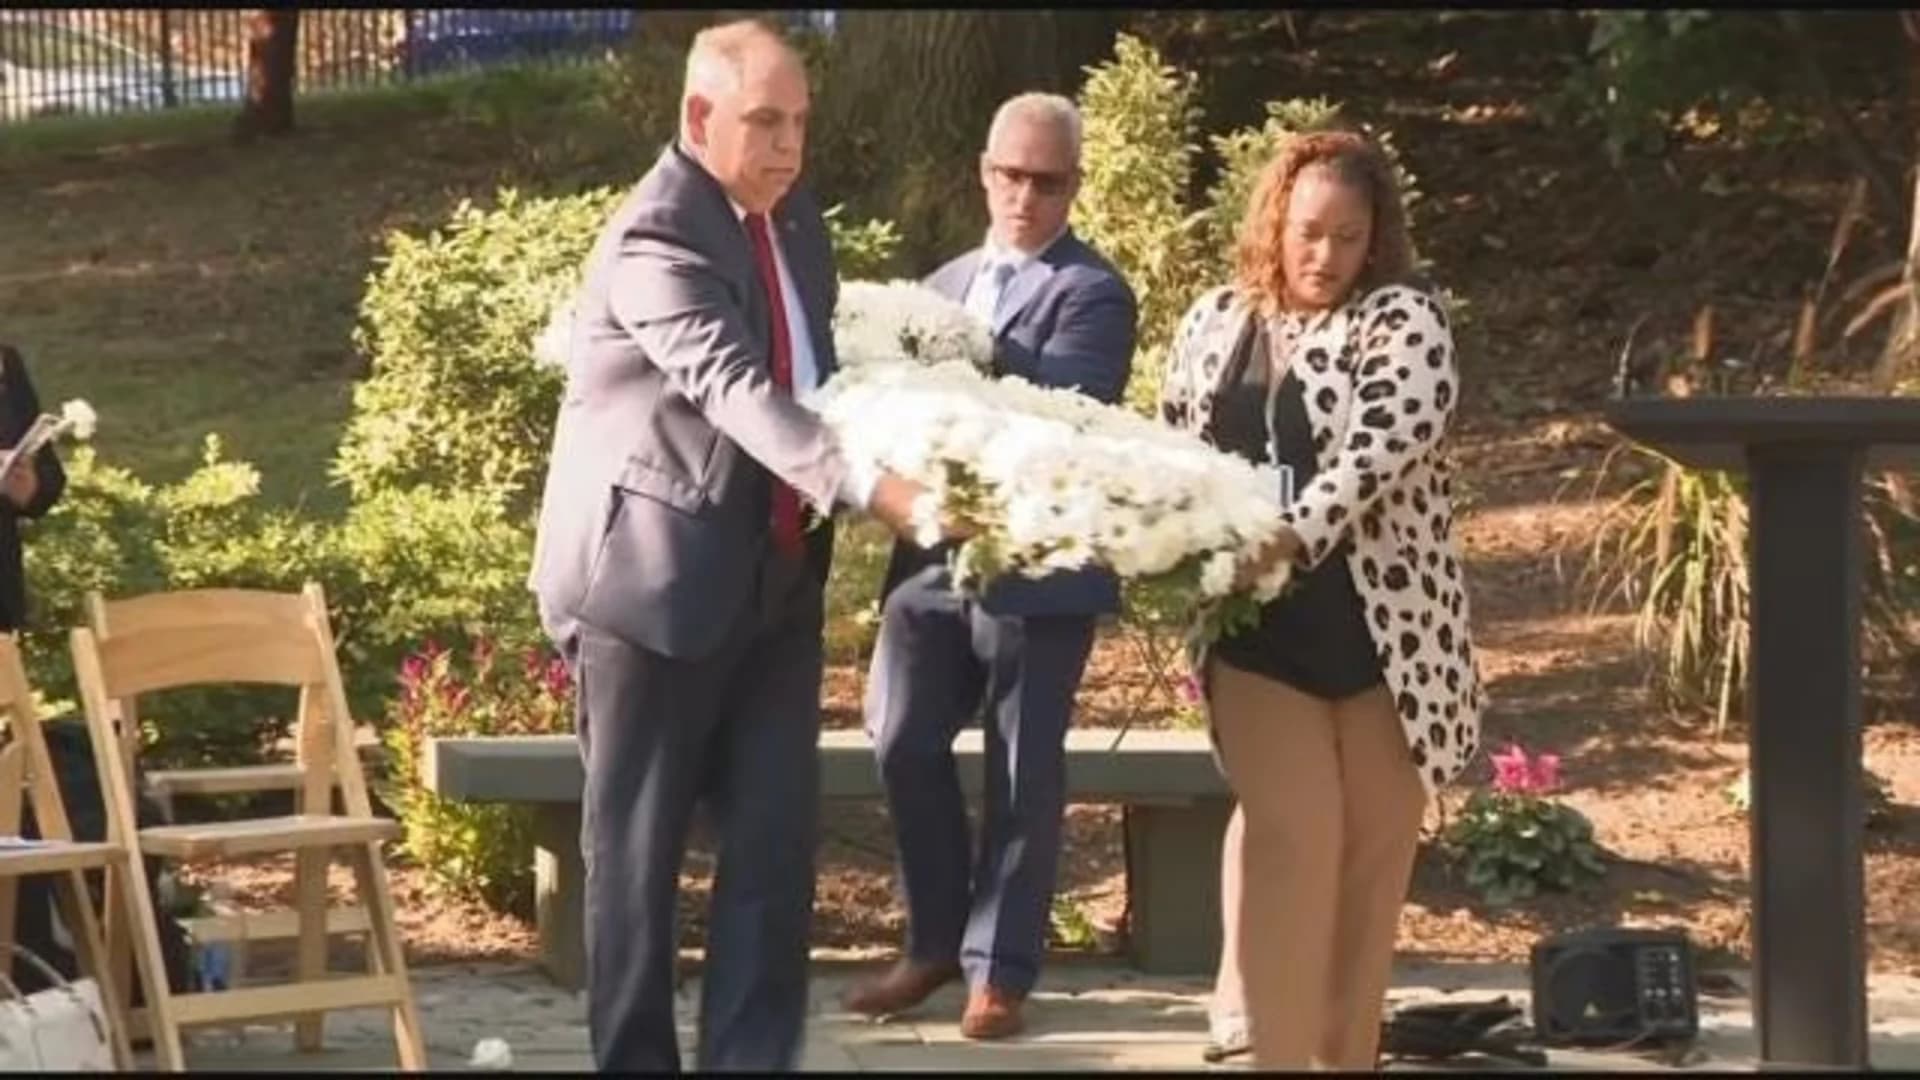 Jacobi Medical Center ceremony honors the lives of Bronx residents lost on Sept. 11